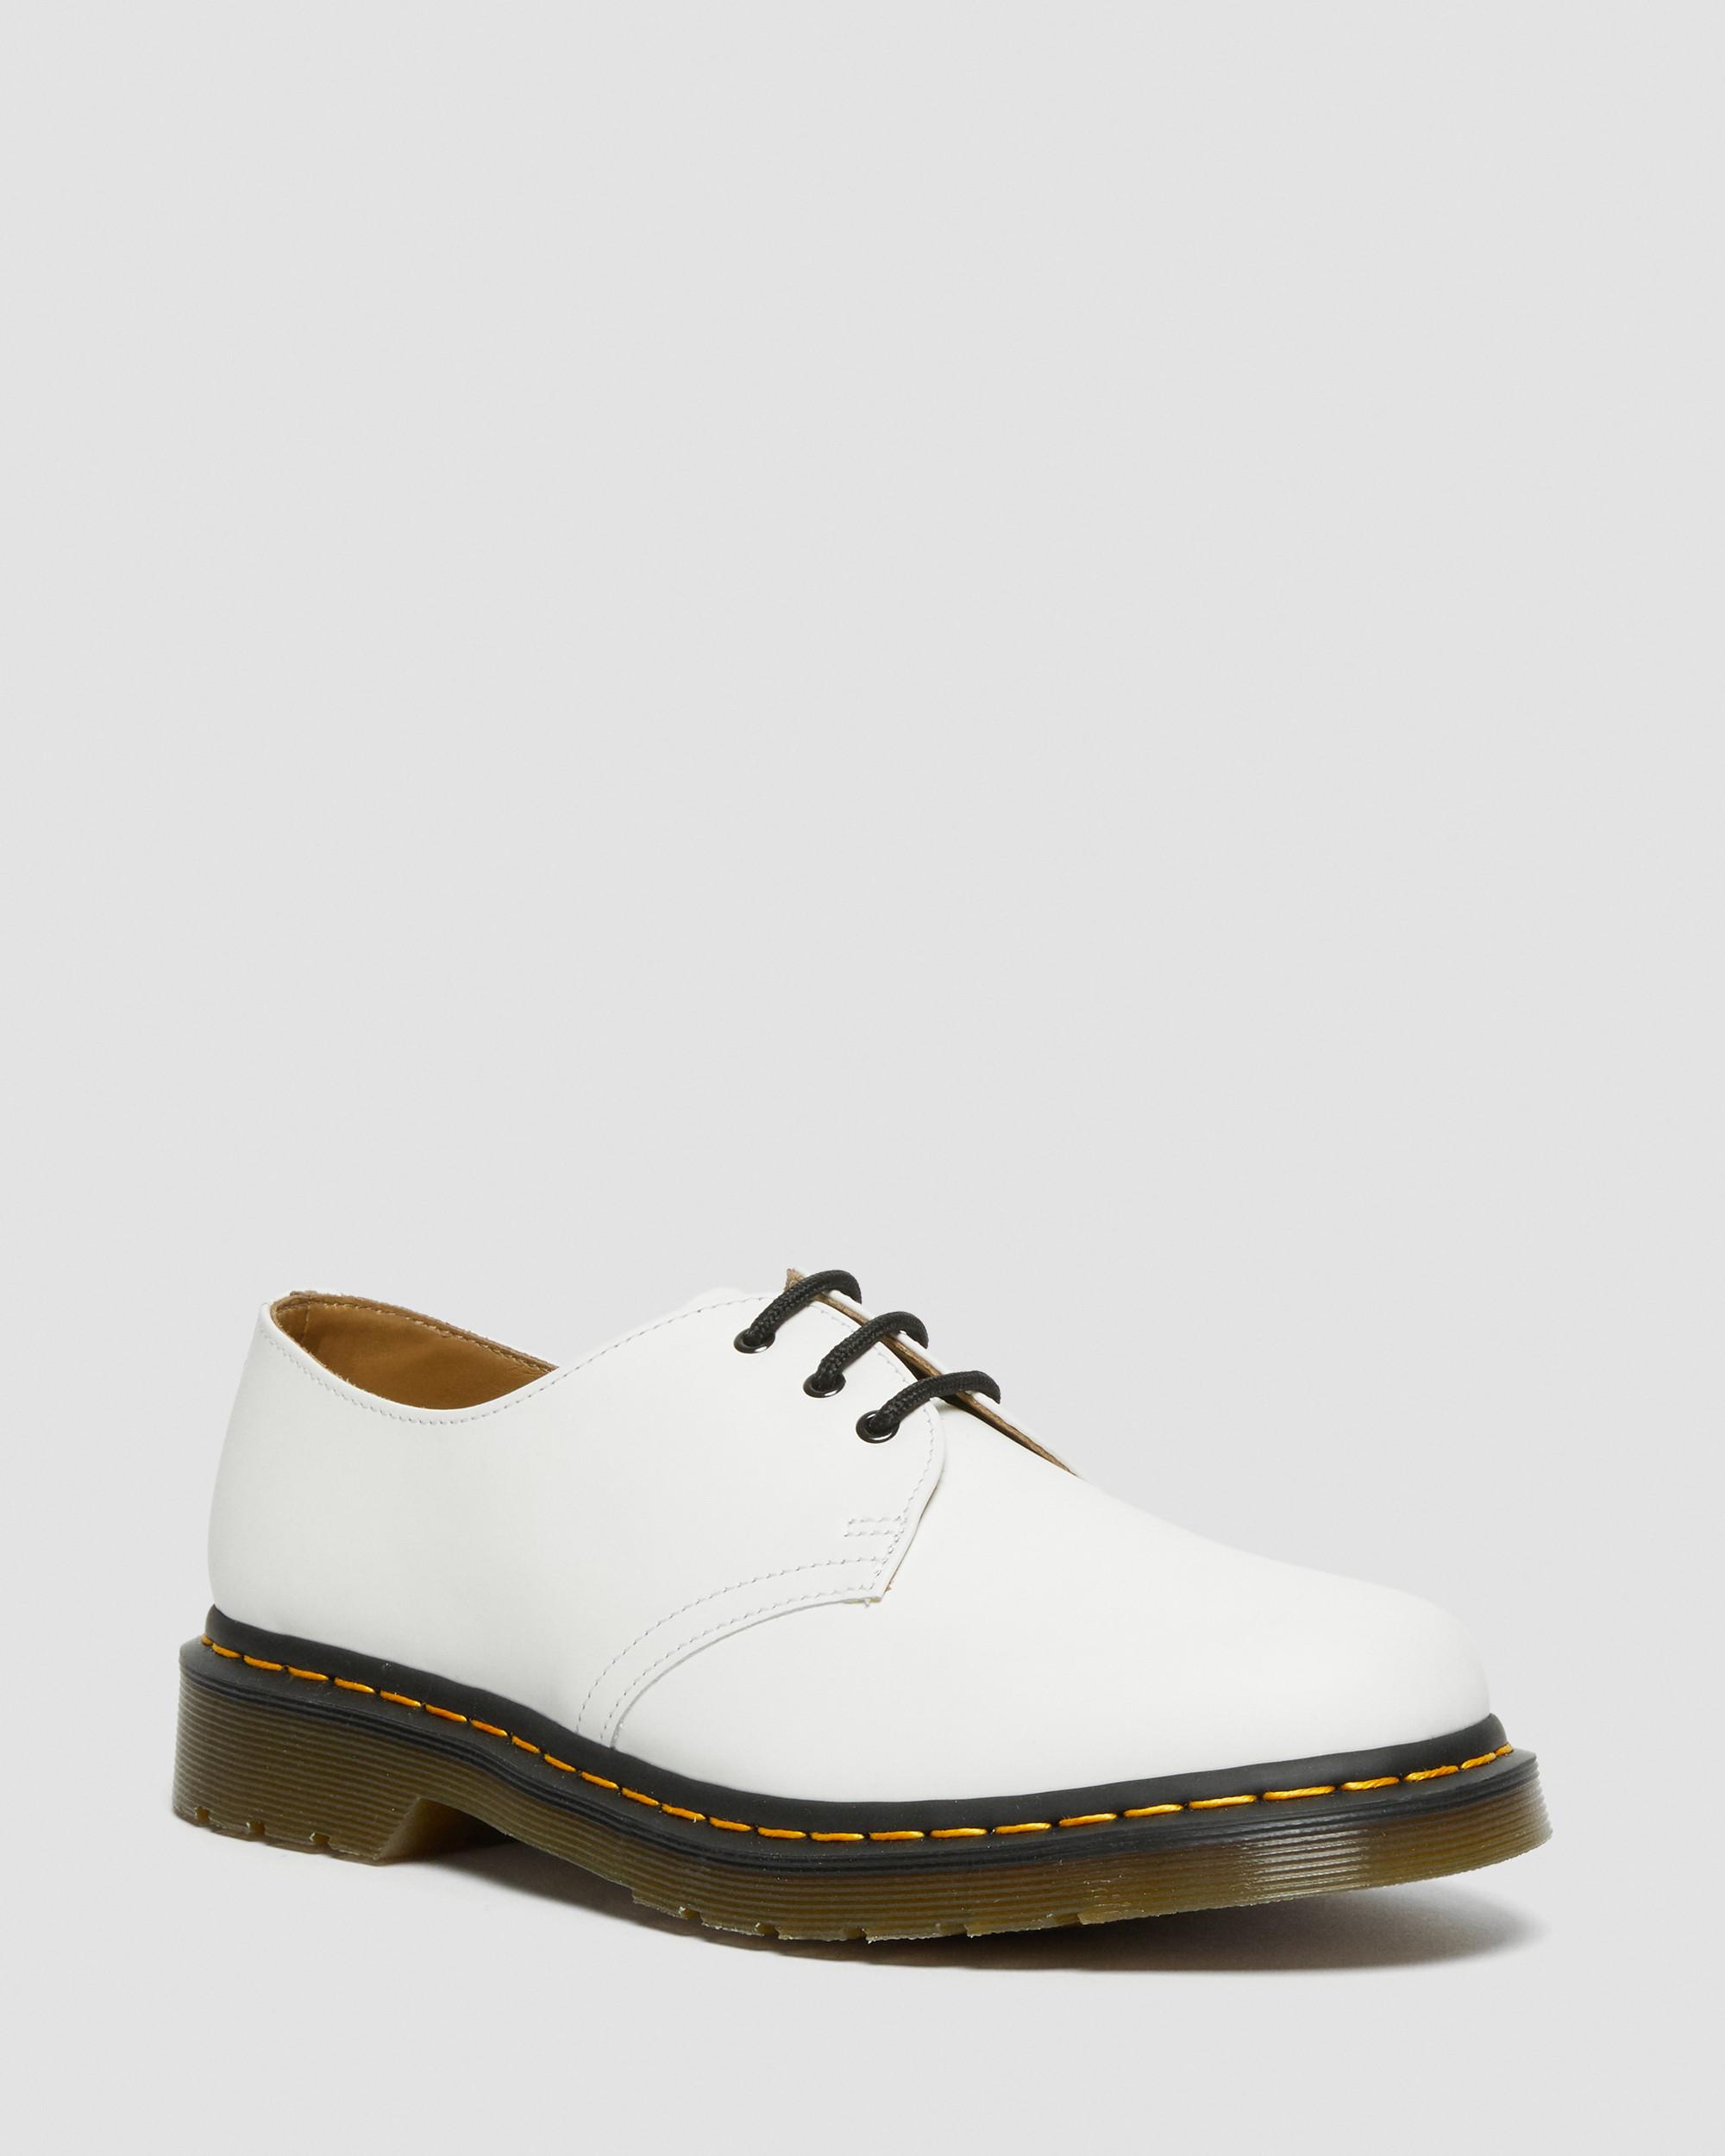 Zoom in Injustice Grave Doc Martens Low White Ireland, SAVE 53% - aveclumiere.com